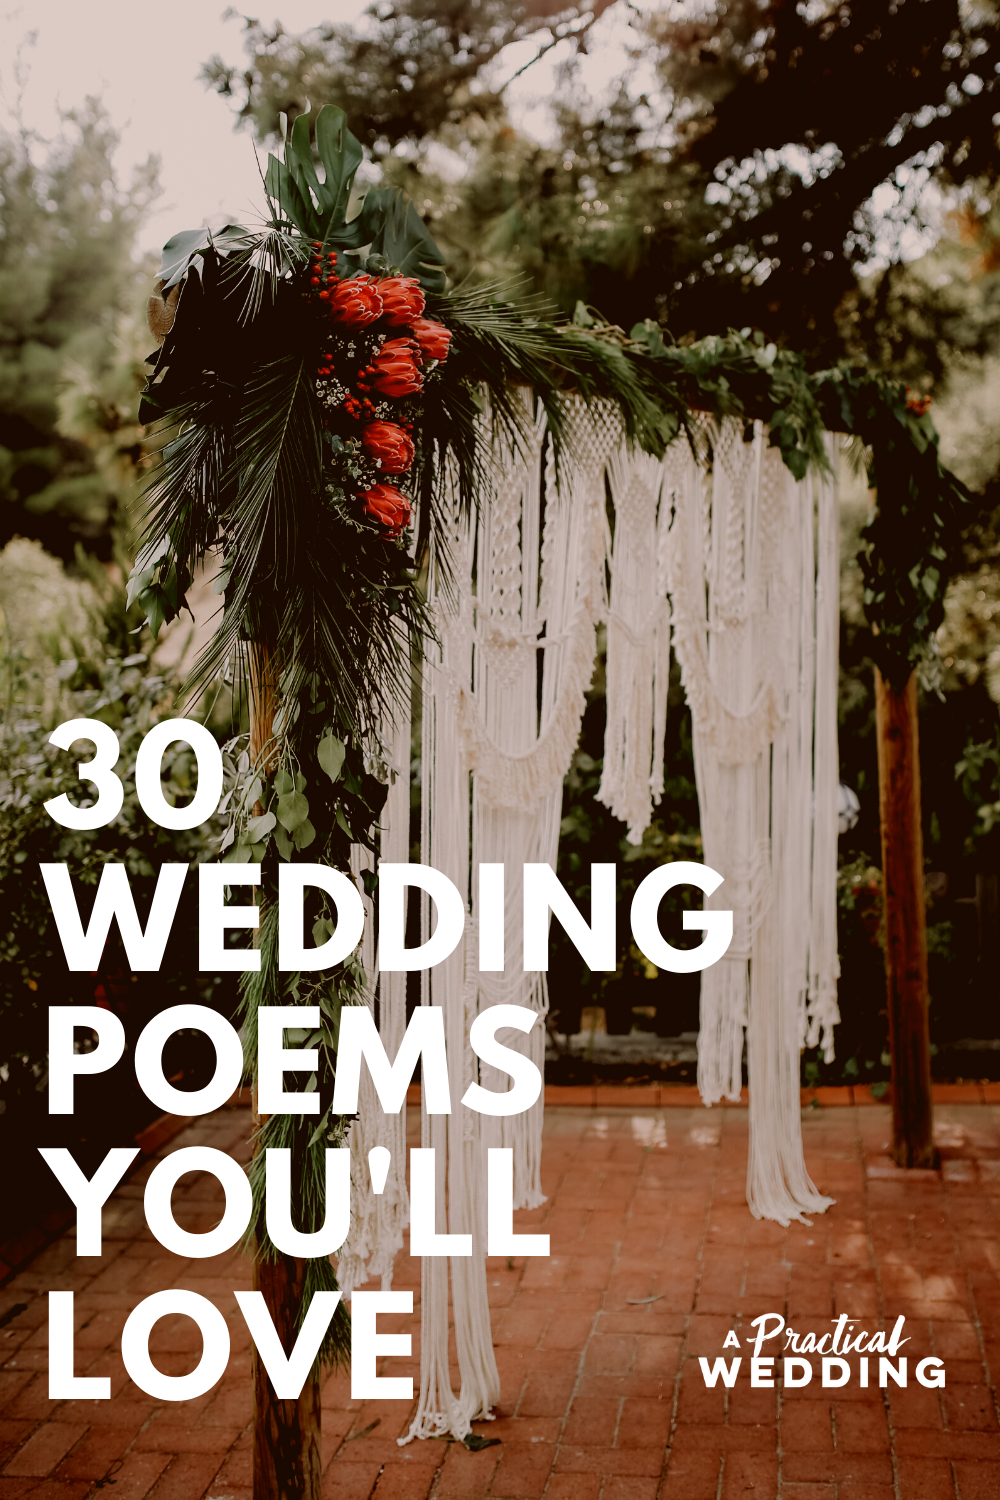 Wedding Poems: 30 Options For Your Ceremony | A Practical Wedding